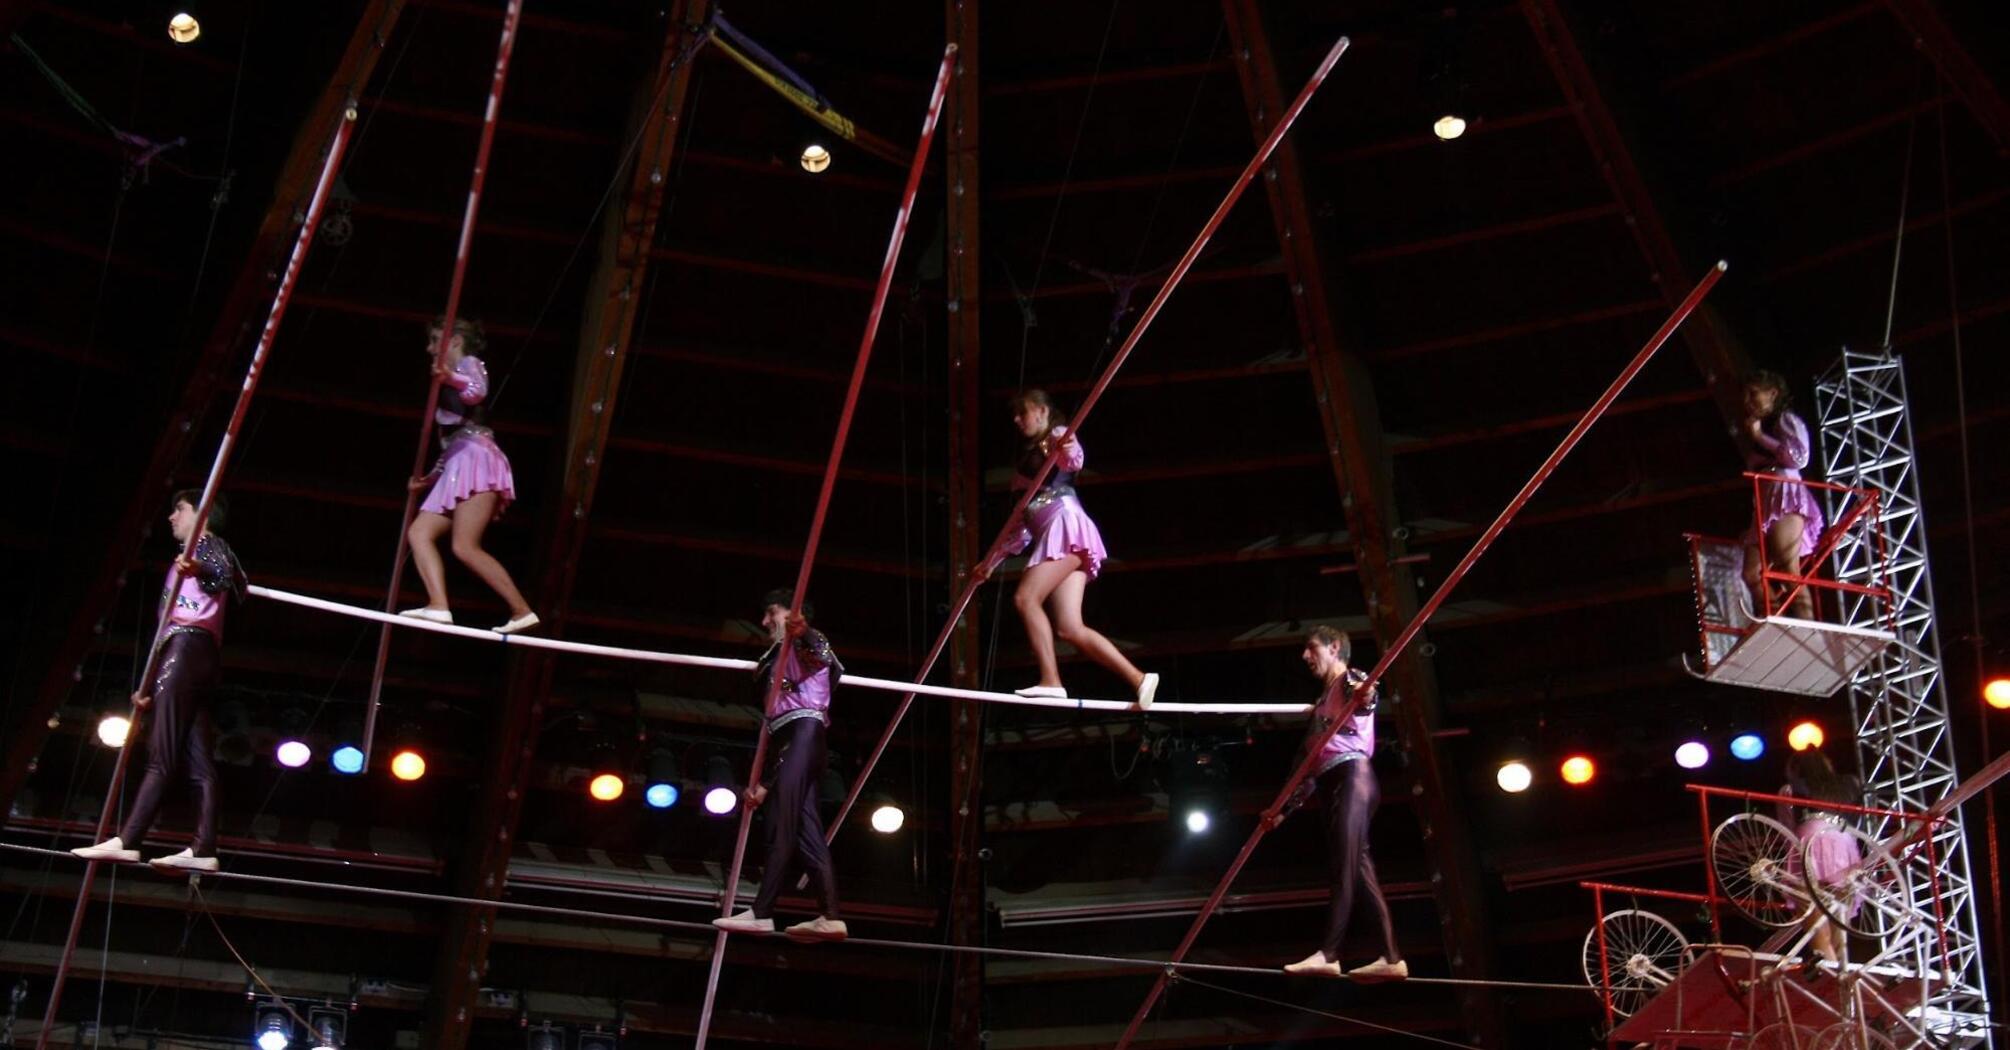 Acrobats perform a thrilling high-wire act